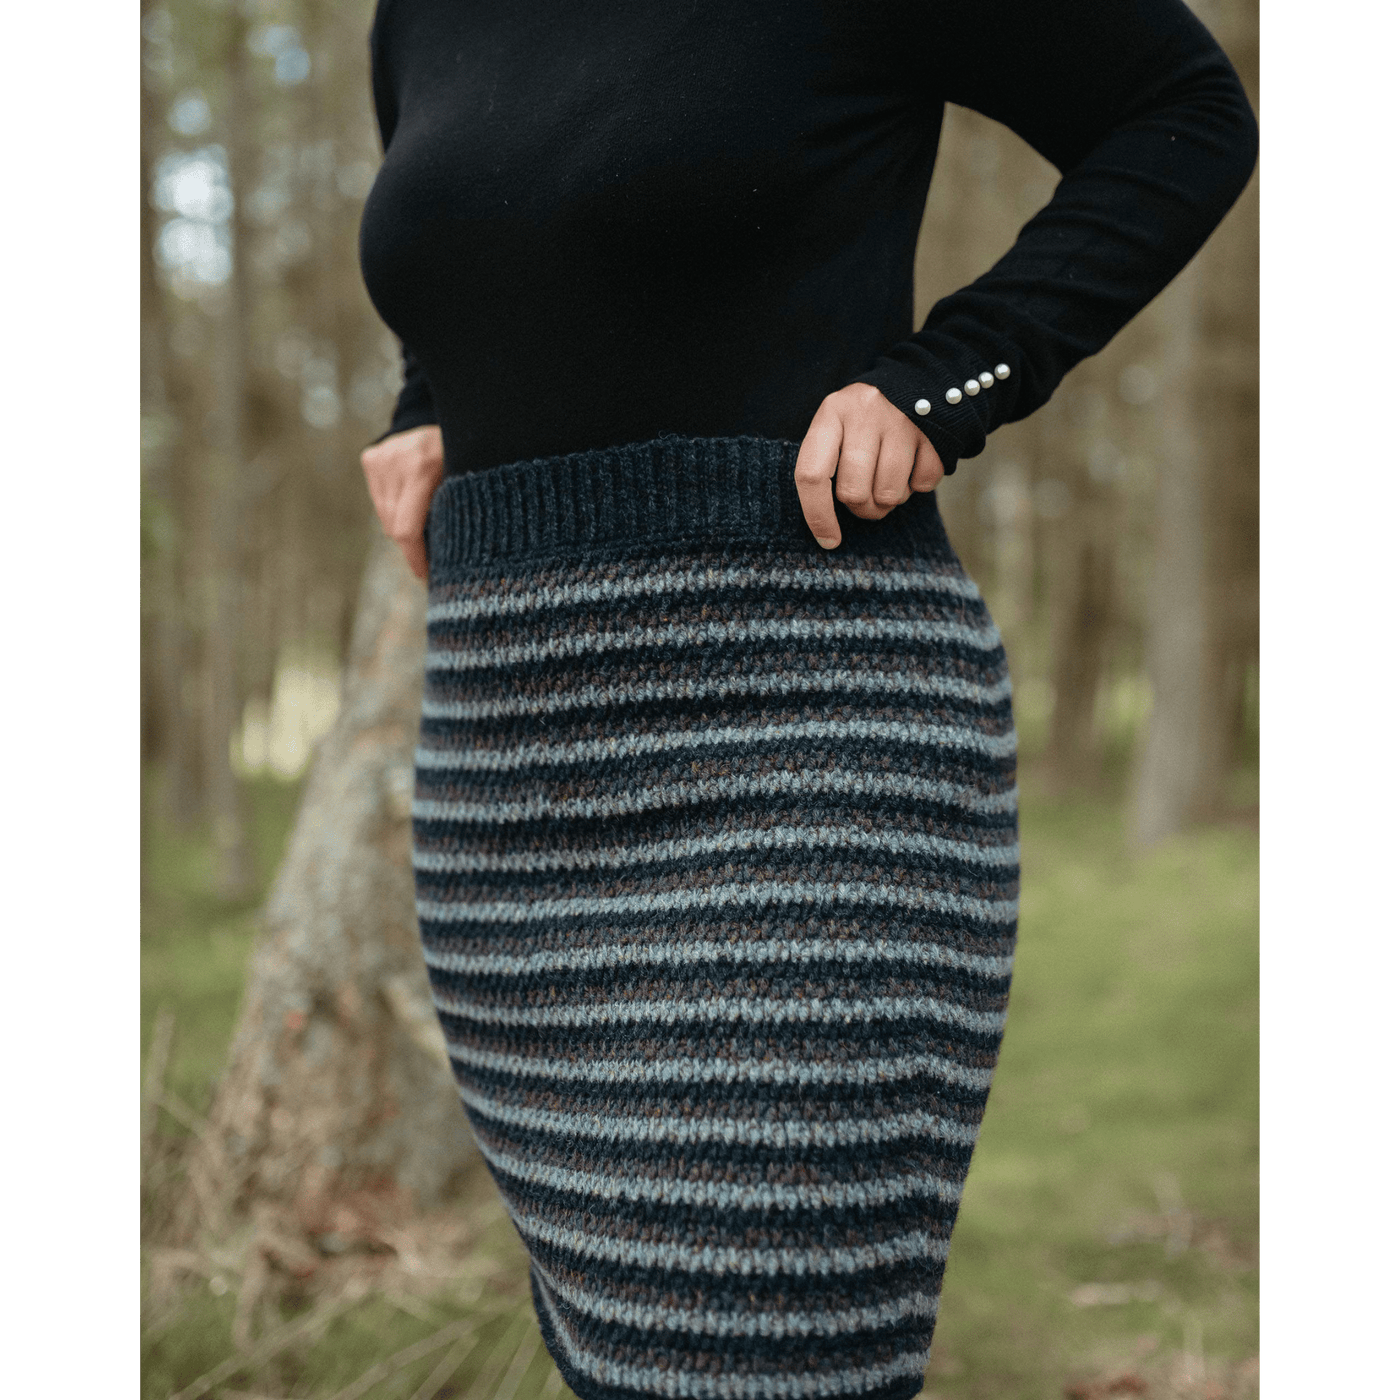 The Woolly Thistle Moorit Magazine - Issue 1 image from magazine showing woman wearing knitted blue striped patterned skirt